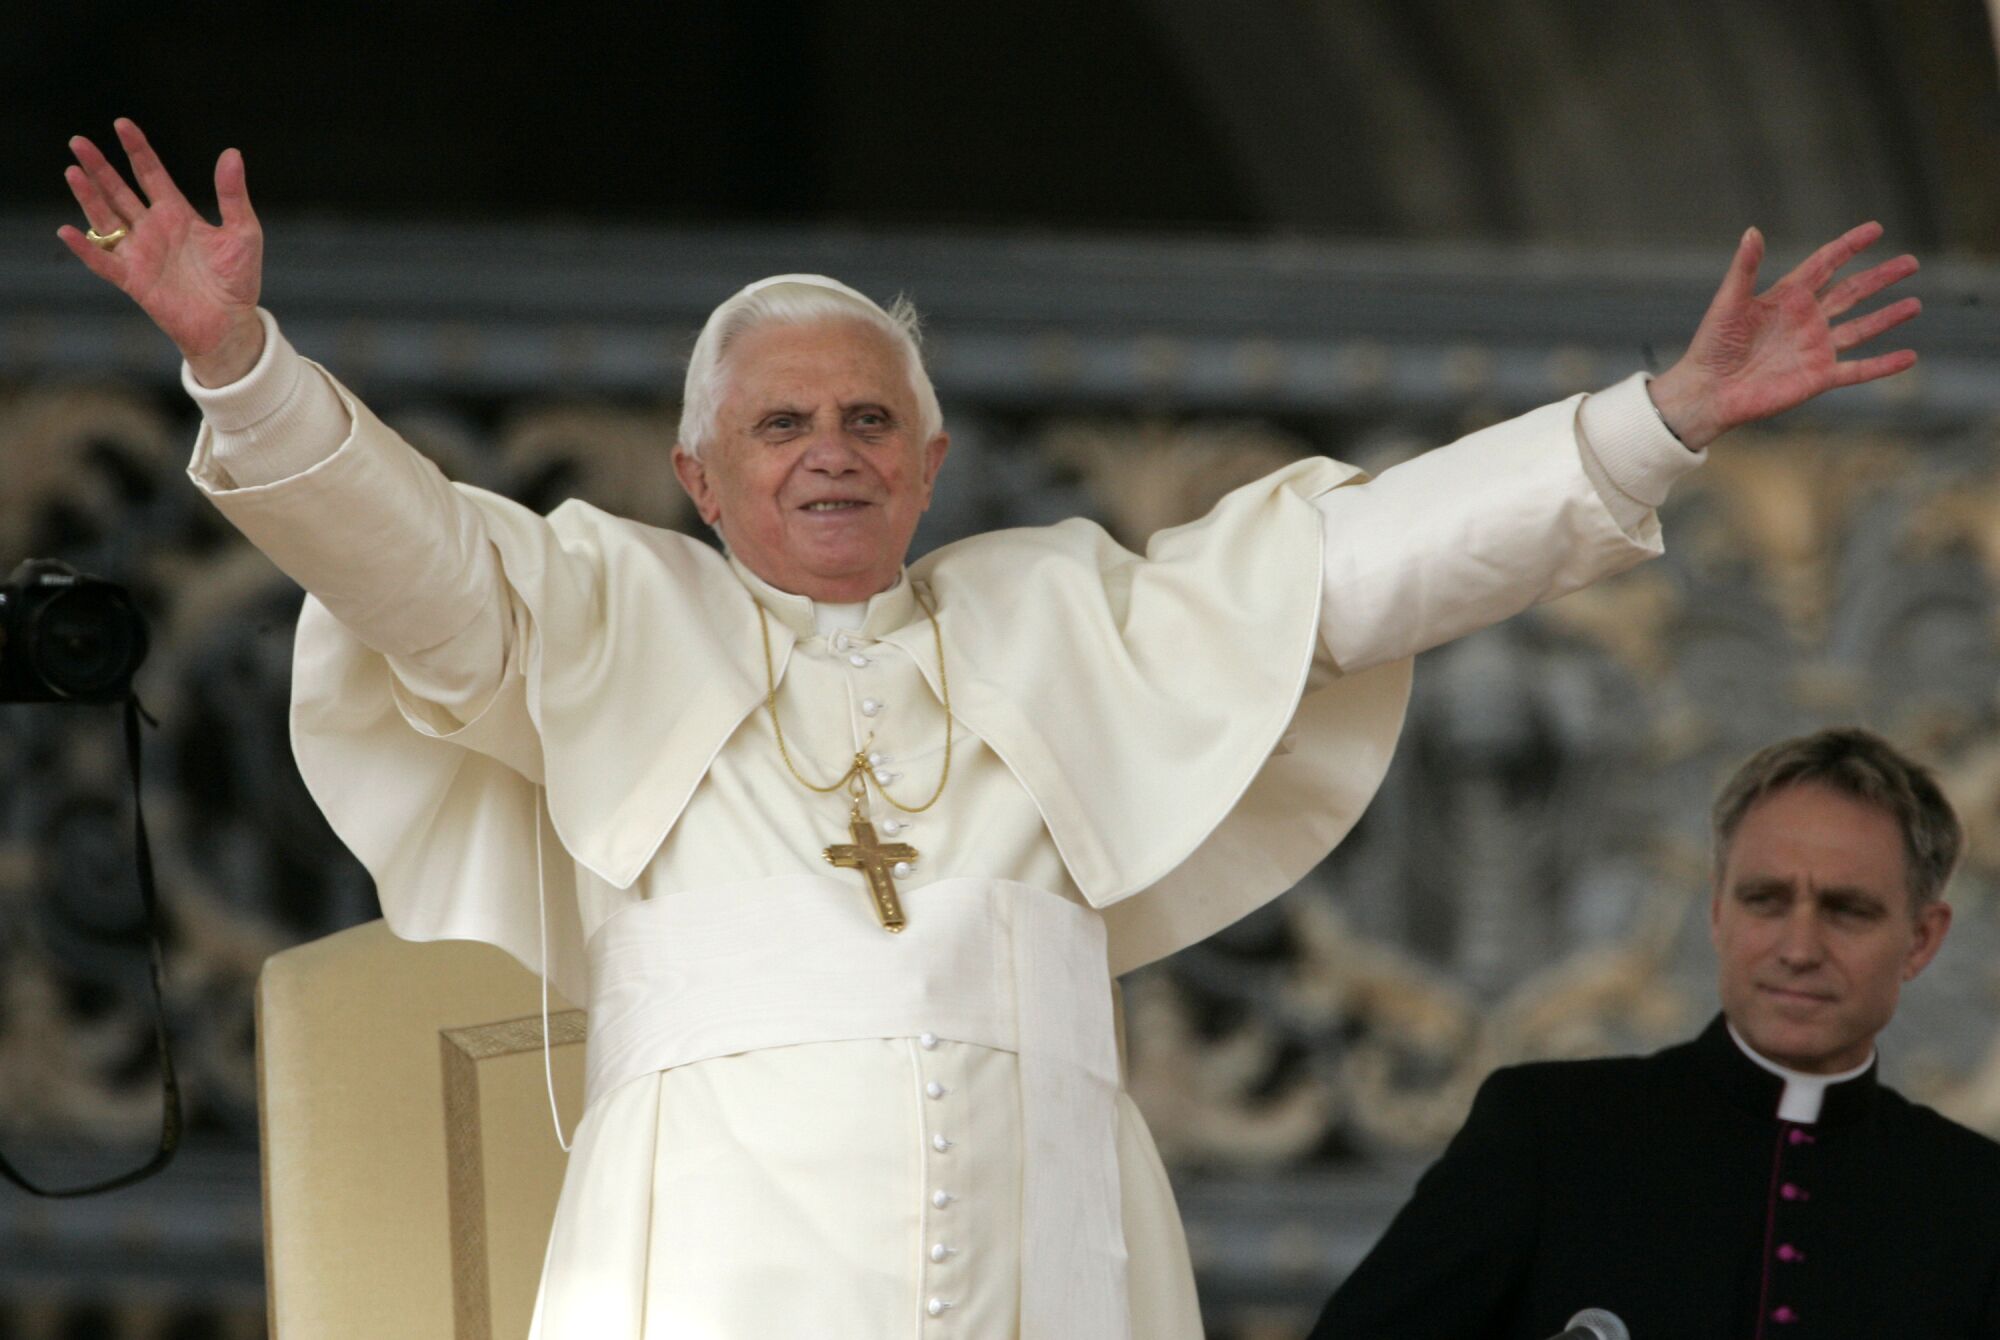 Pope Benedict XVI raises his arms as another man looks on.